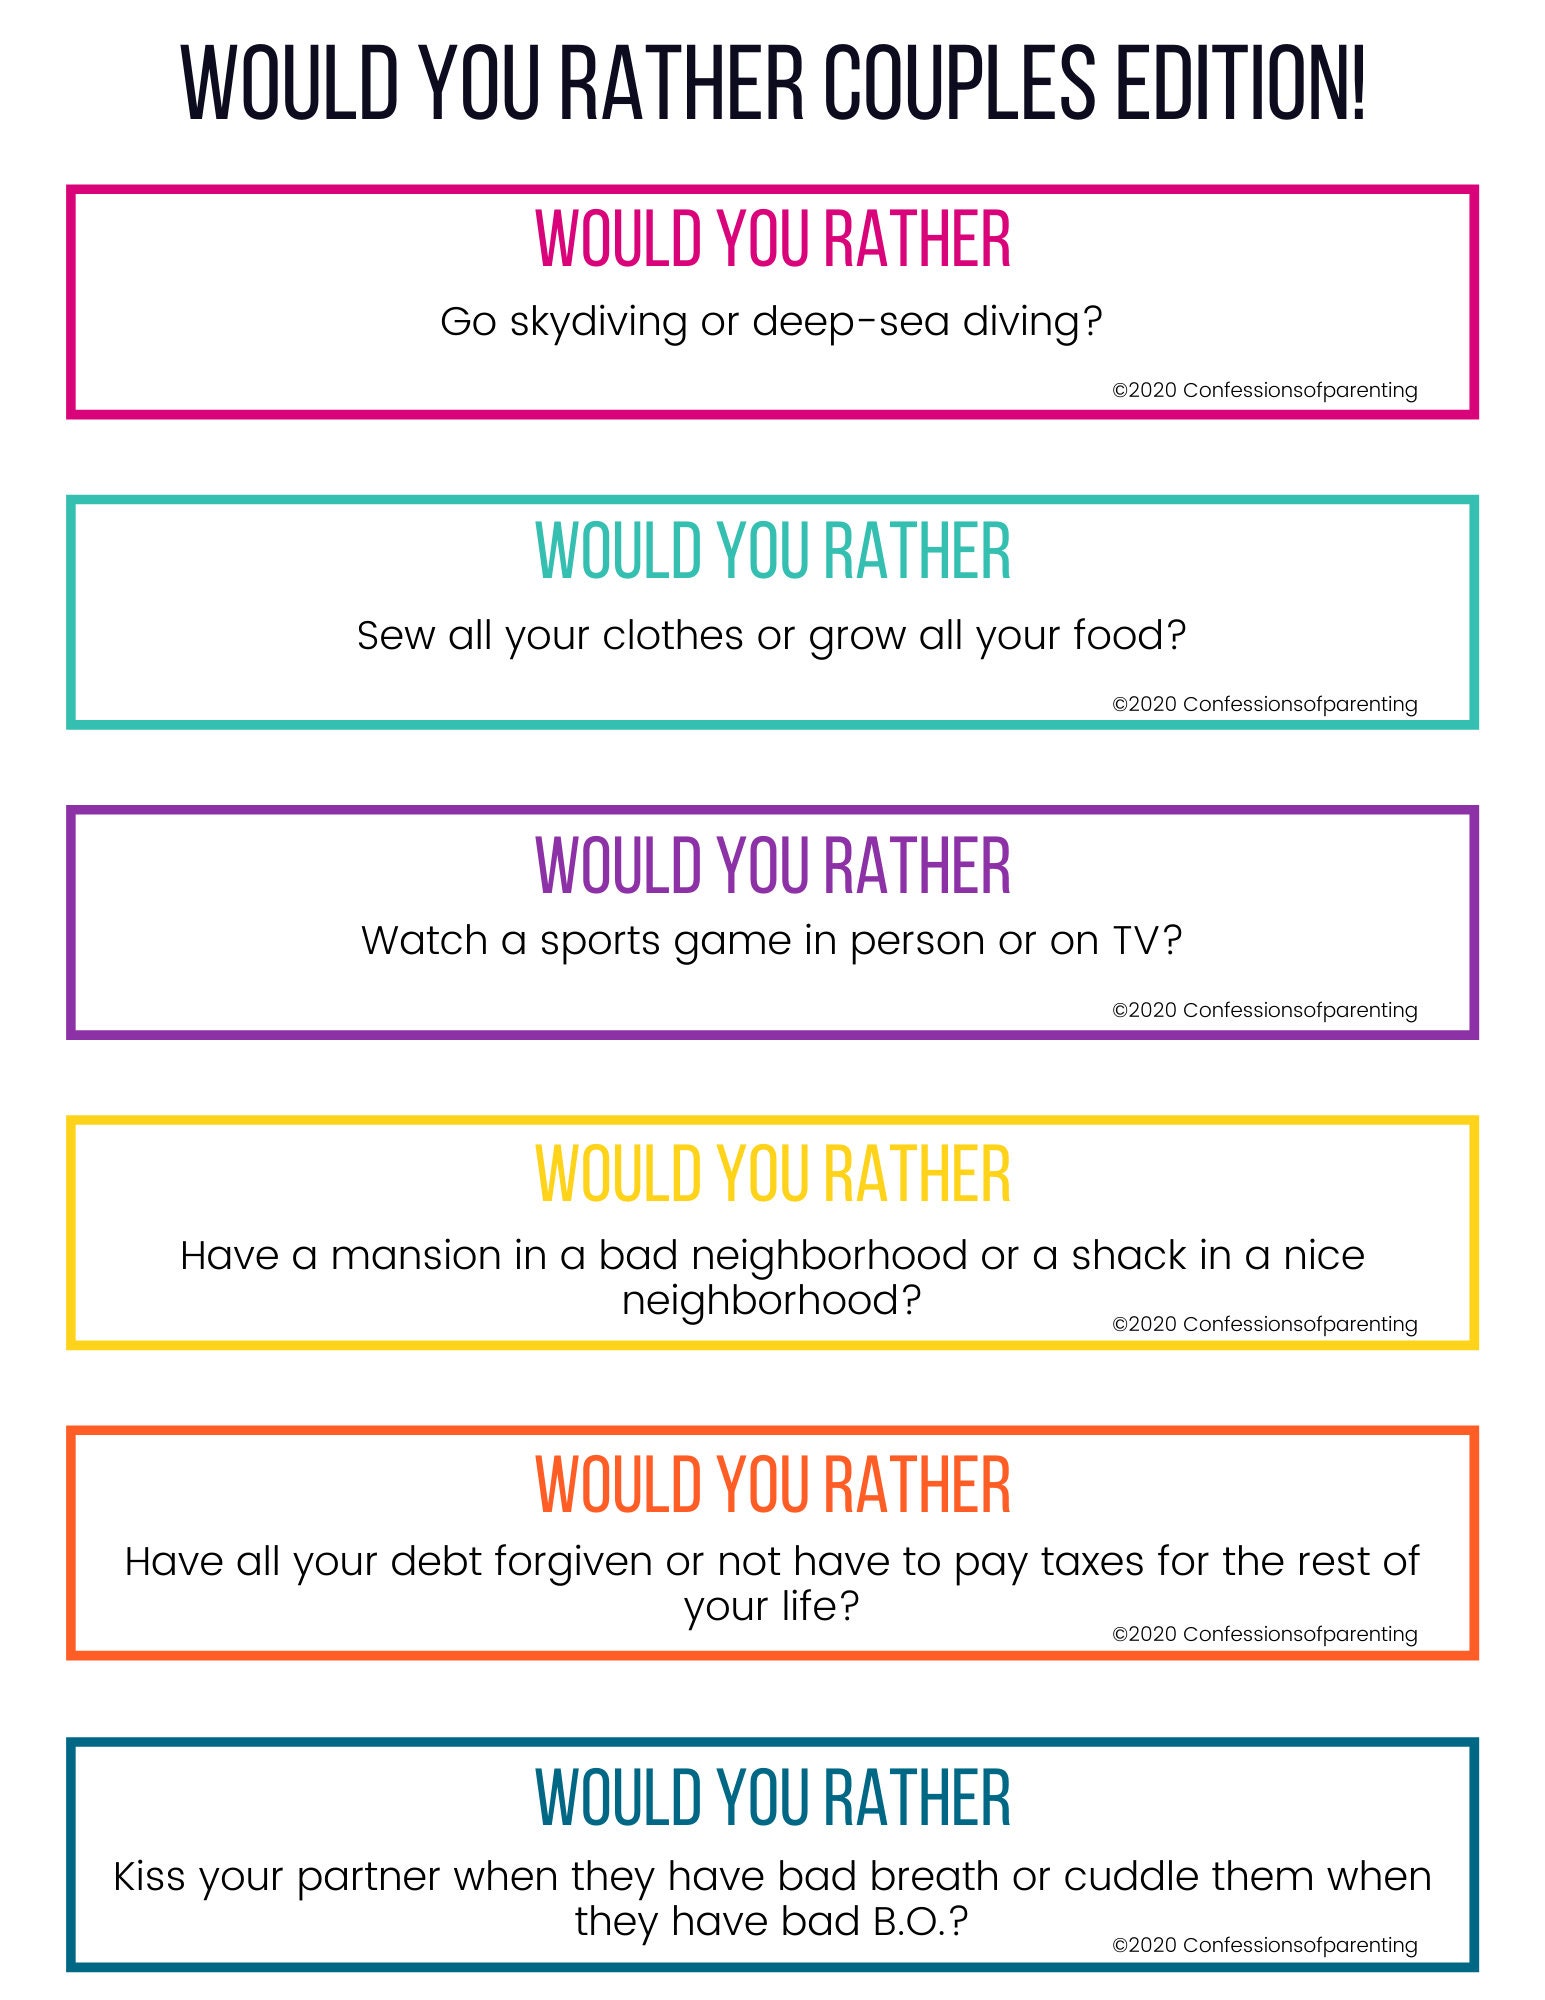 100 WYR Questions to Ask in r/WouldYouRather 